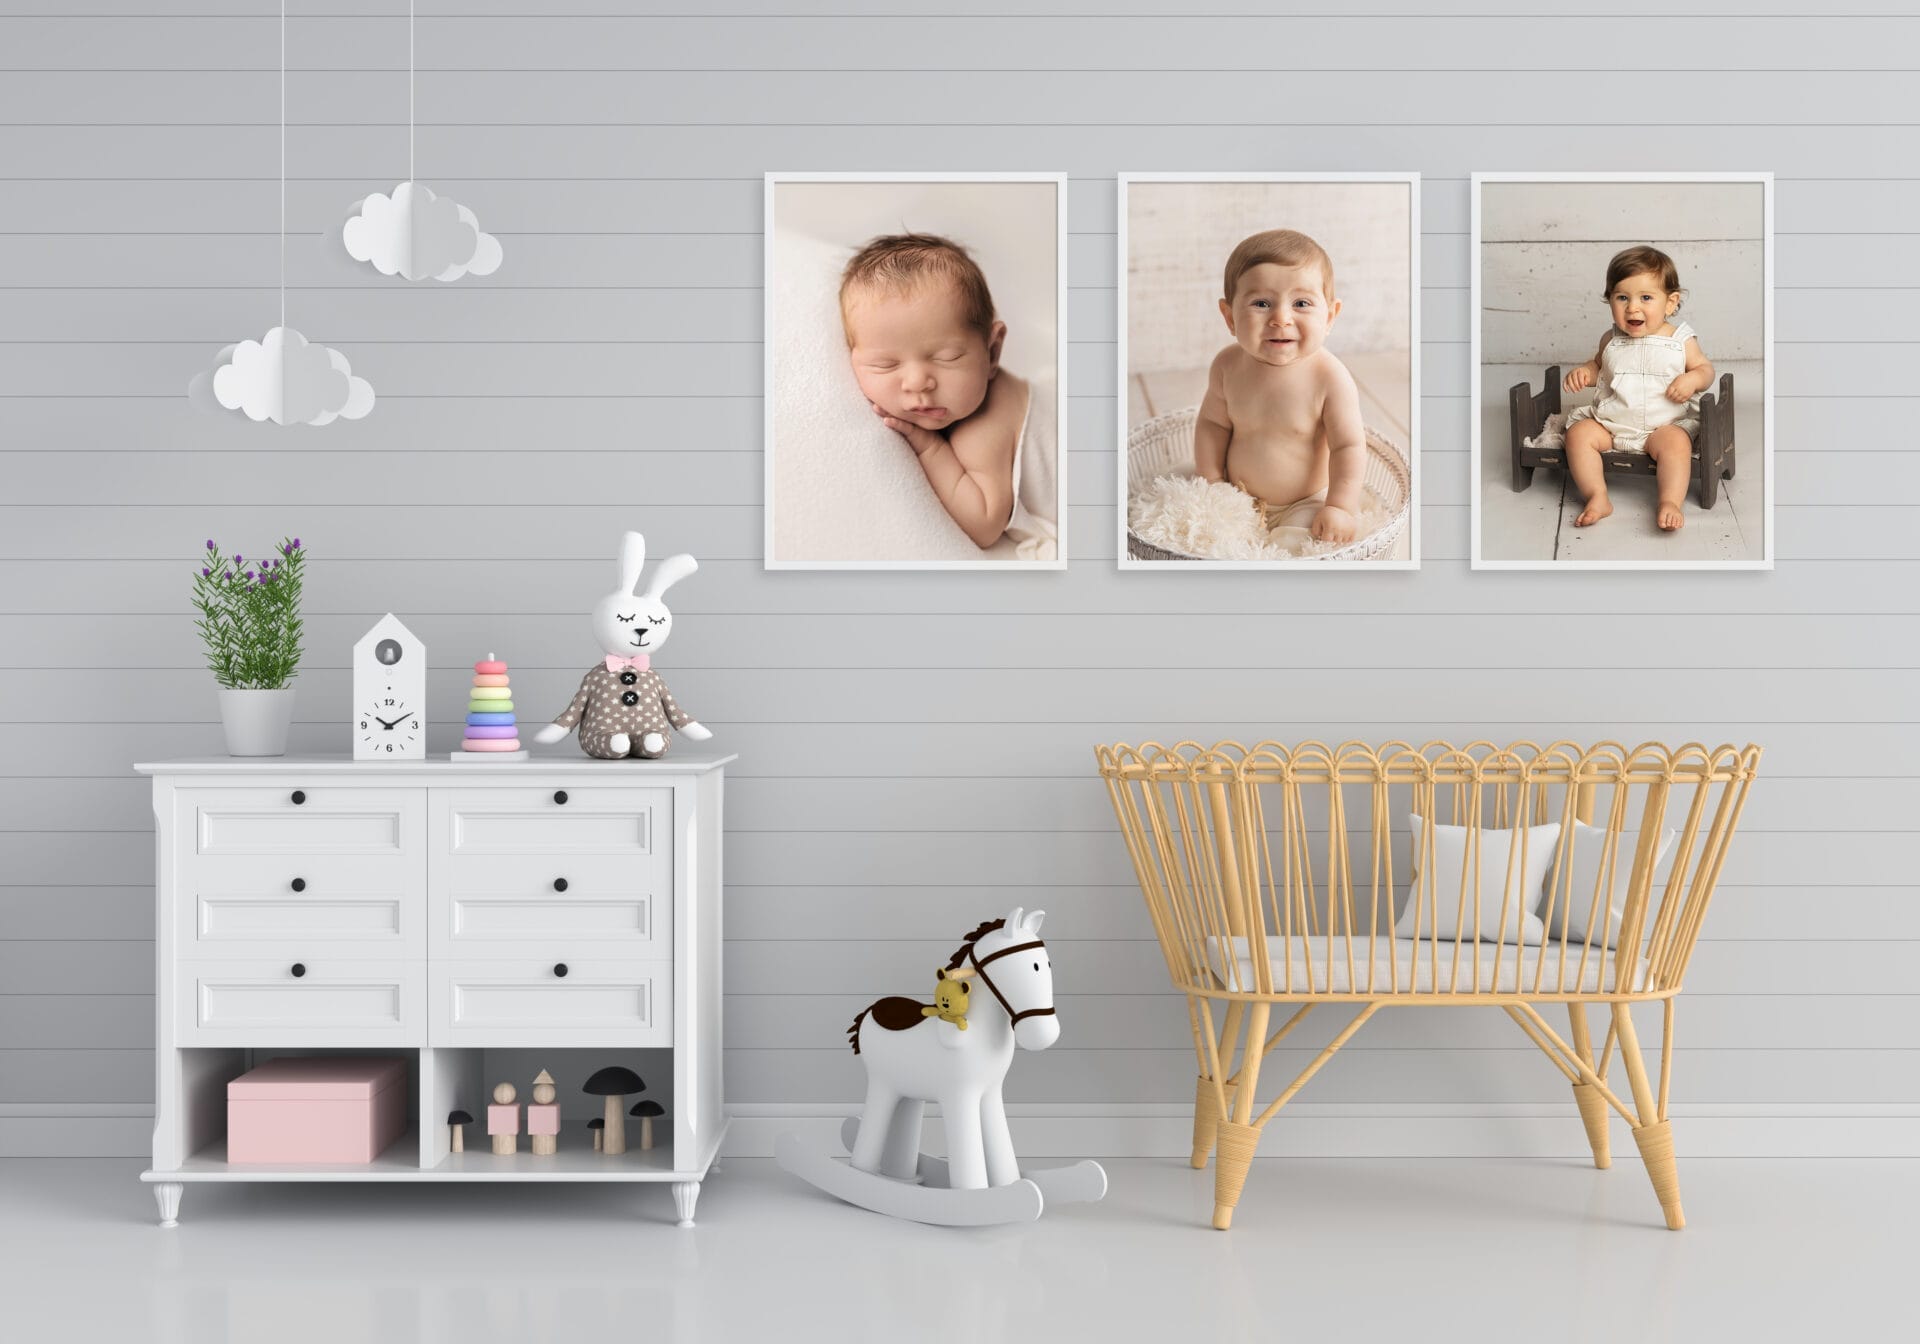 A boy's room with wall art from his one-year milestone photo sessions from the newborn, sitter, and one-year photo sessions. 